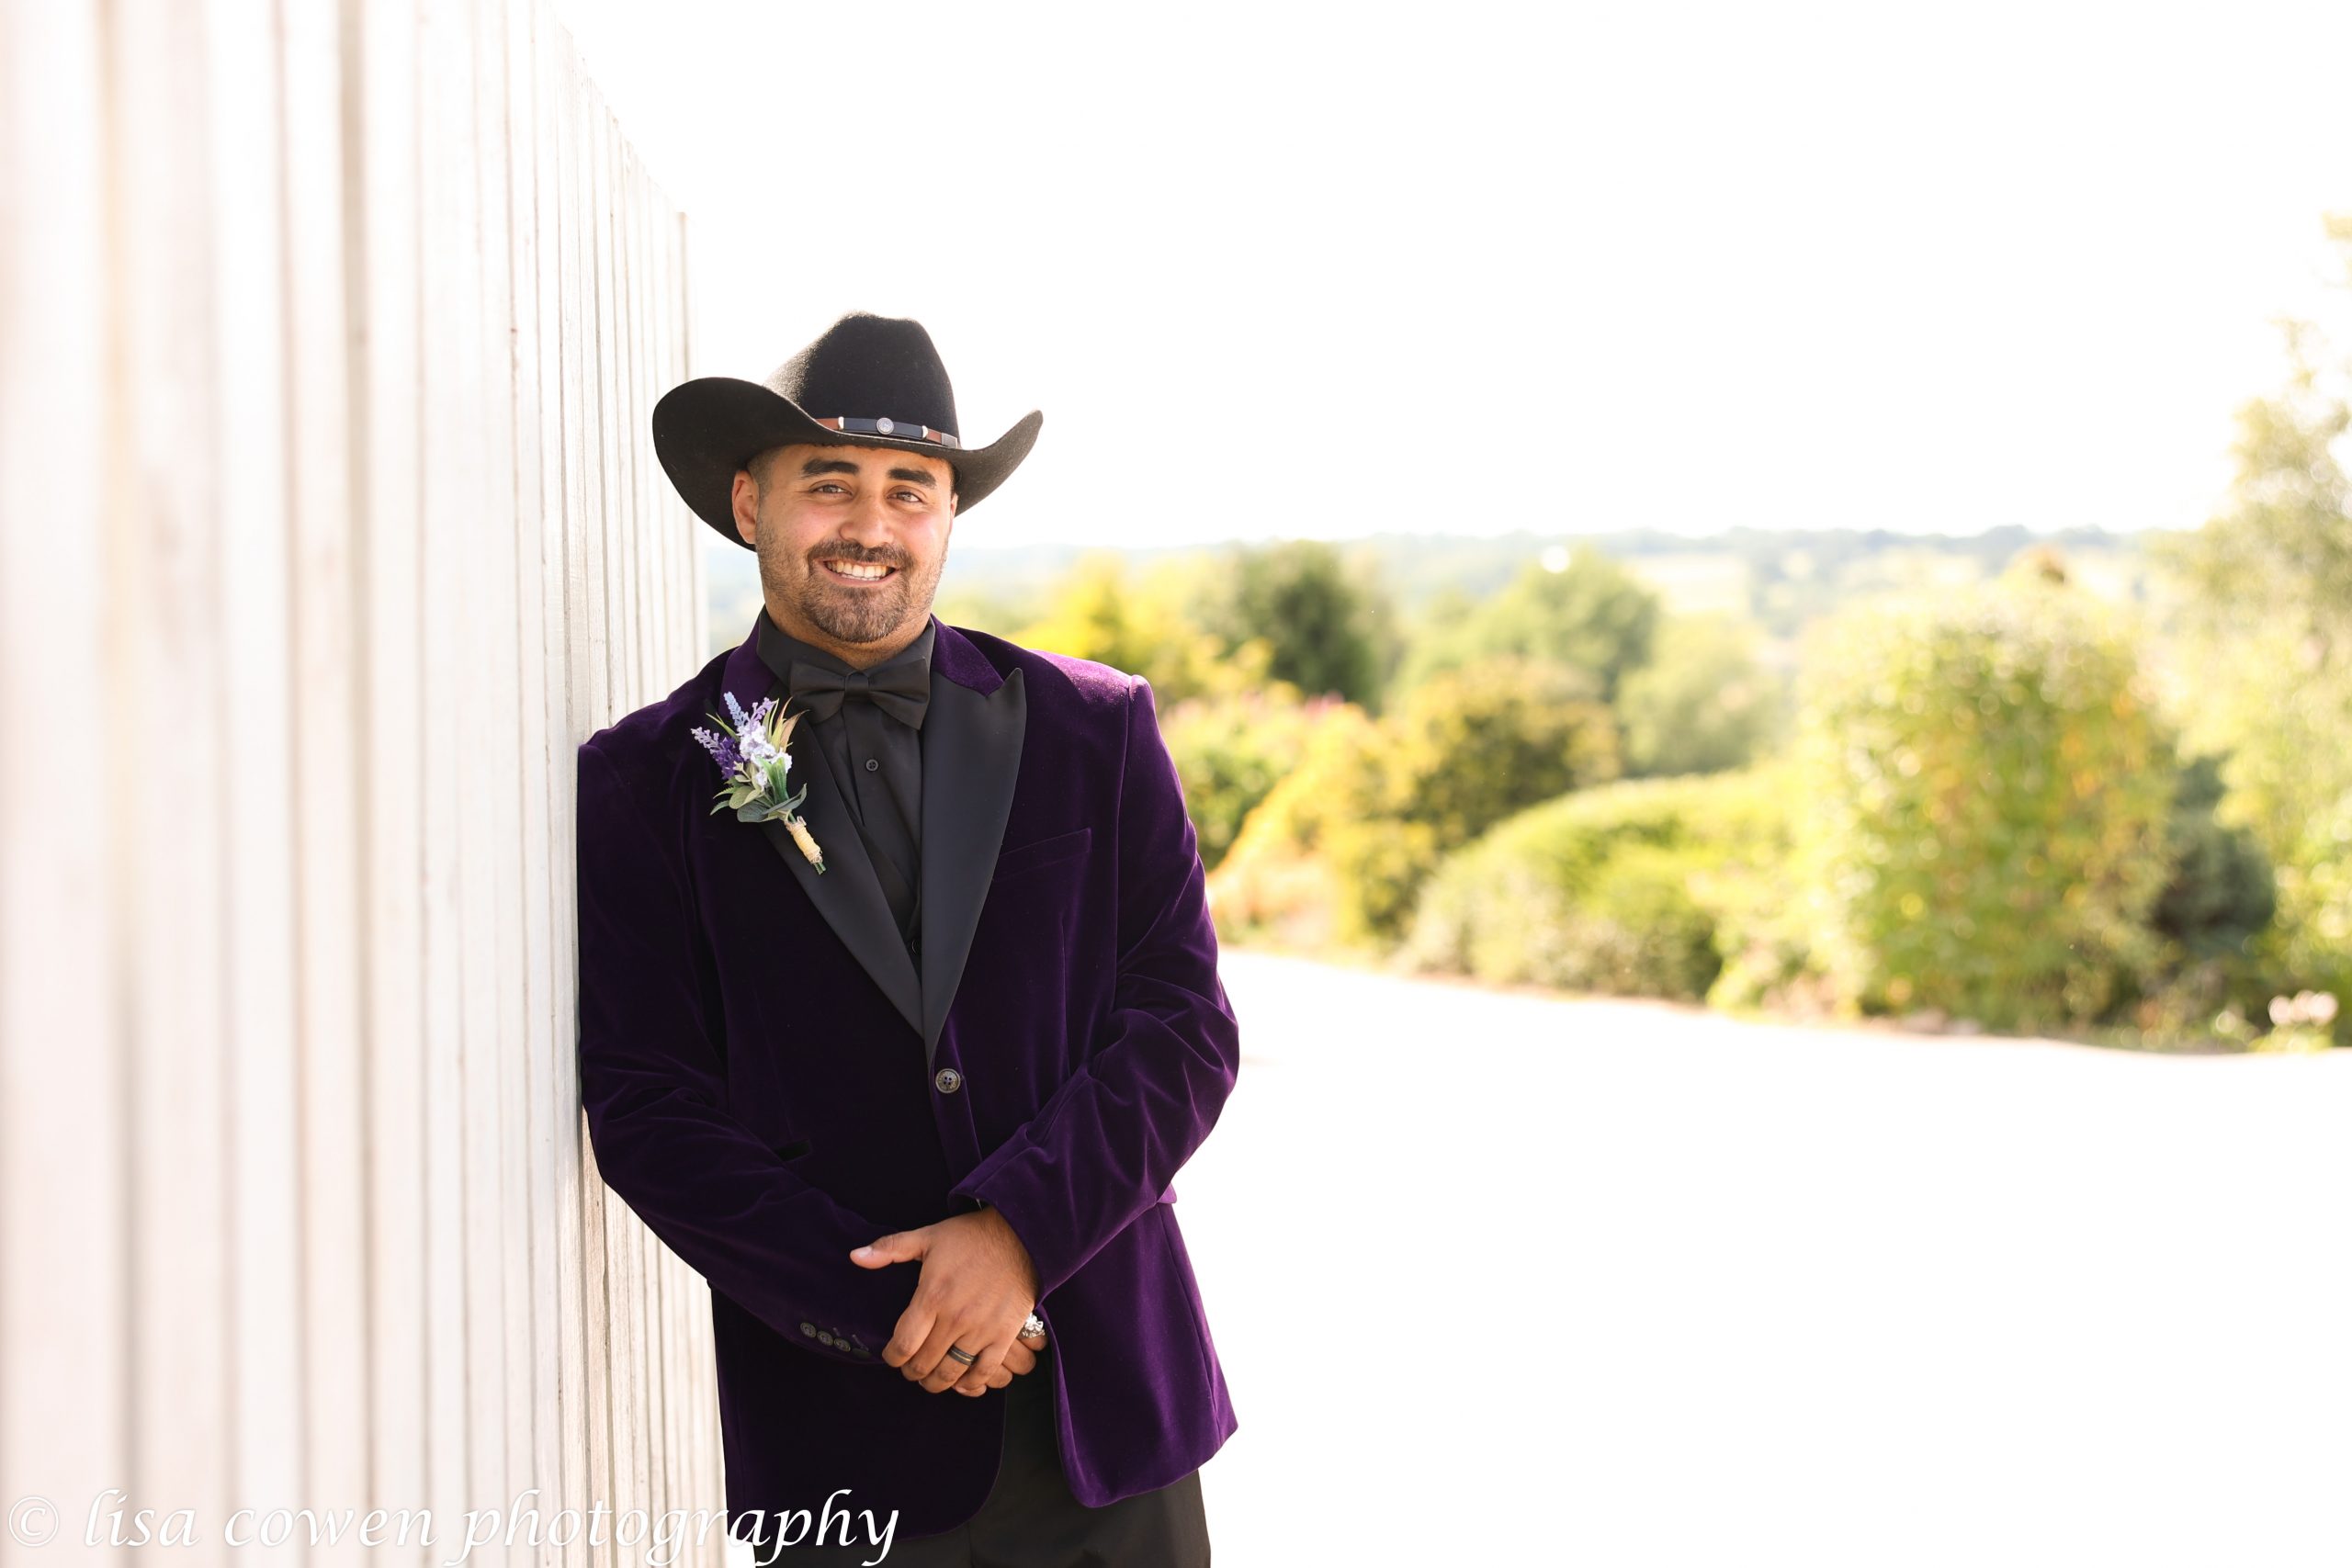 A cowboy groom from Texas